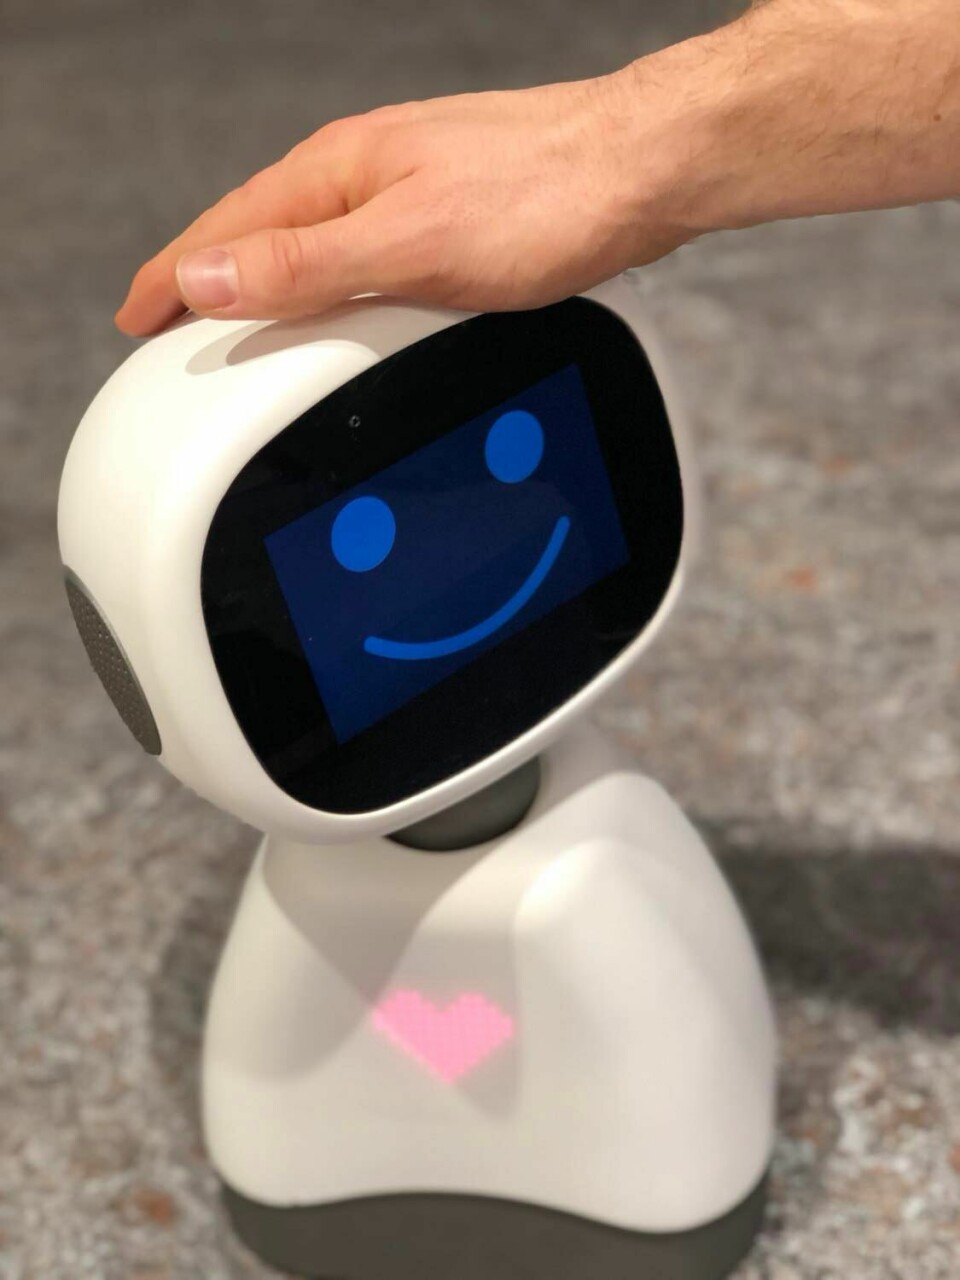 How can social robots and sensor technology help patients with dementia? ELMo, the emotional robot developed in the project.